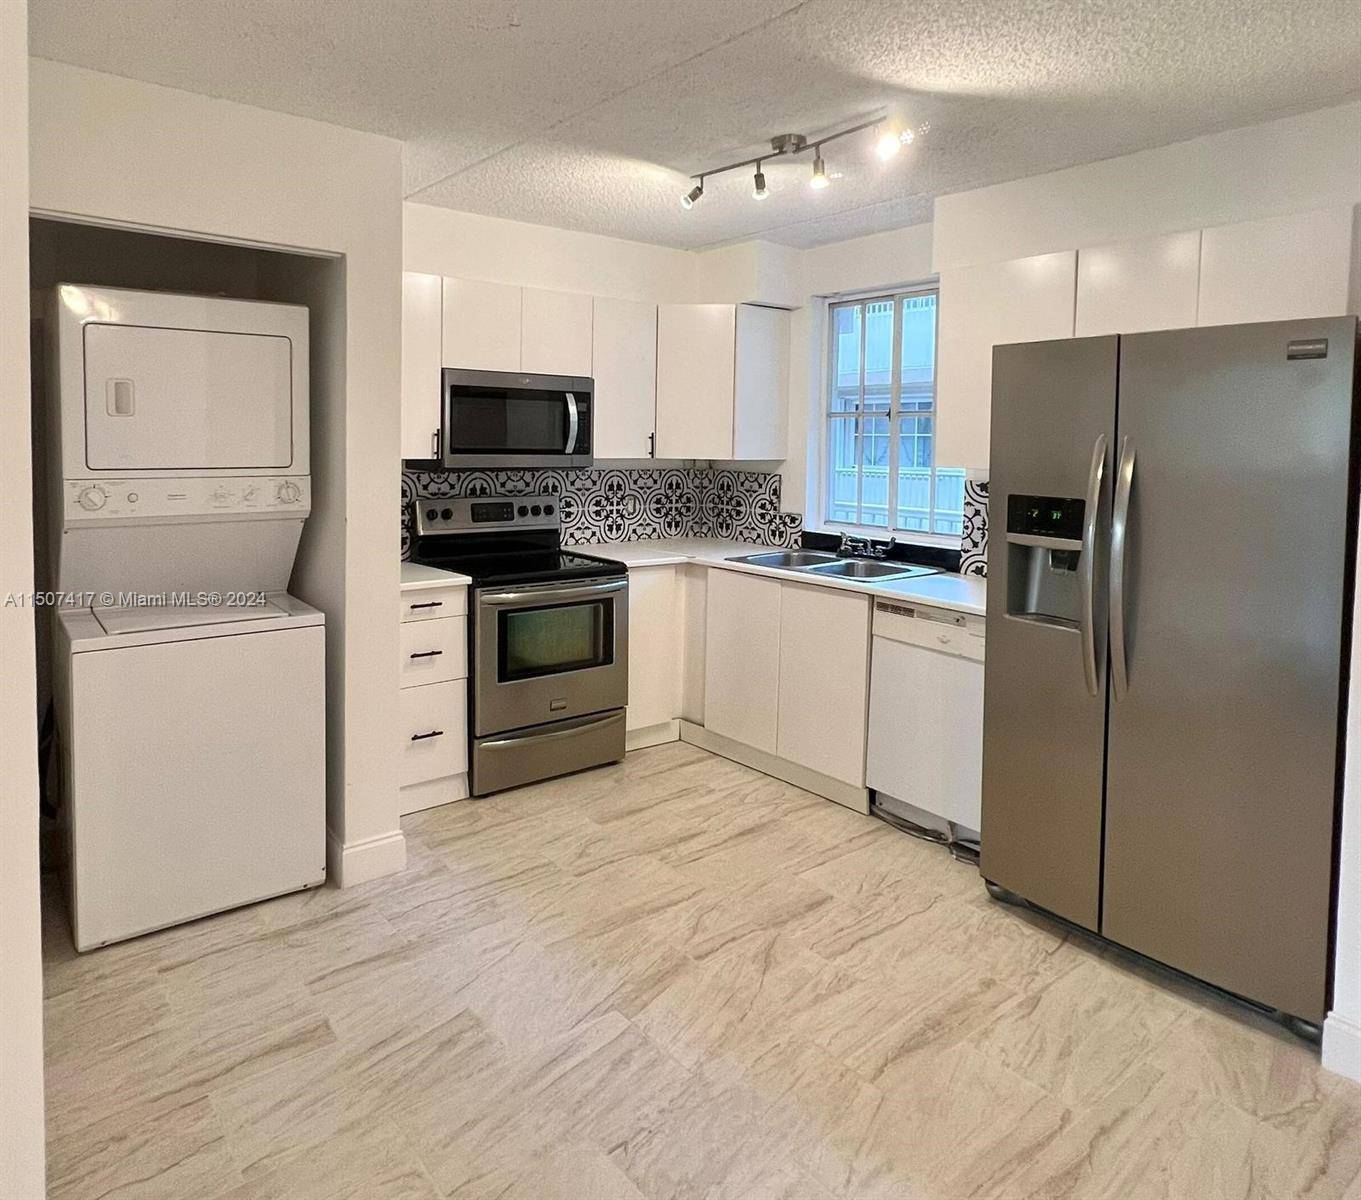 Welcome to an exclusive opportunity to become the proud owner of a recently remodeled and incredibly spacious 3 bedroom, 2 bath Condo in the highly sought after Miami Lakes, FL.